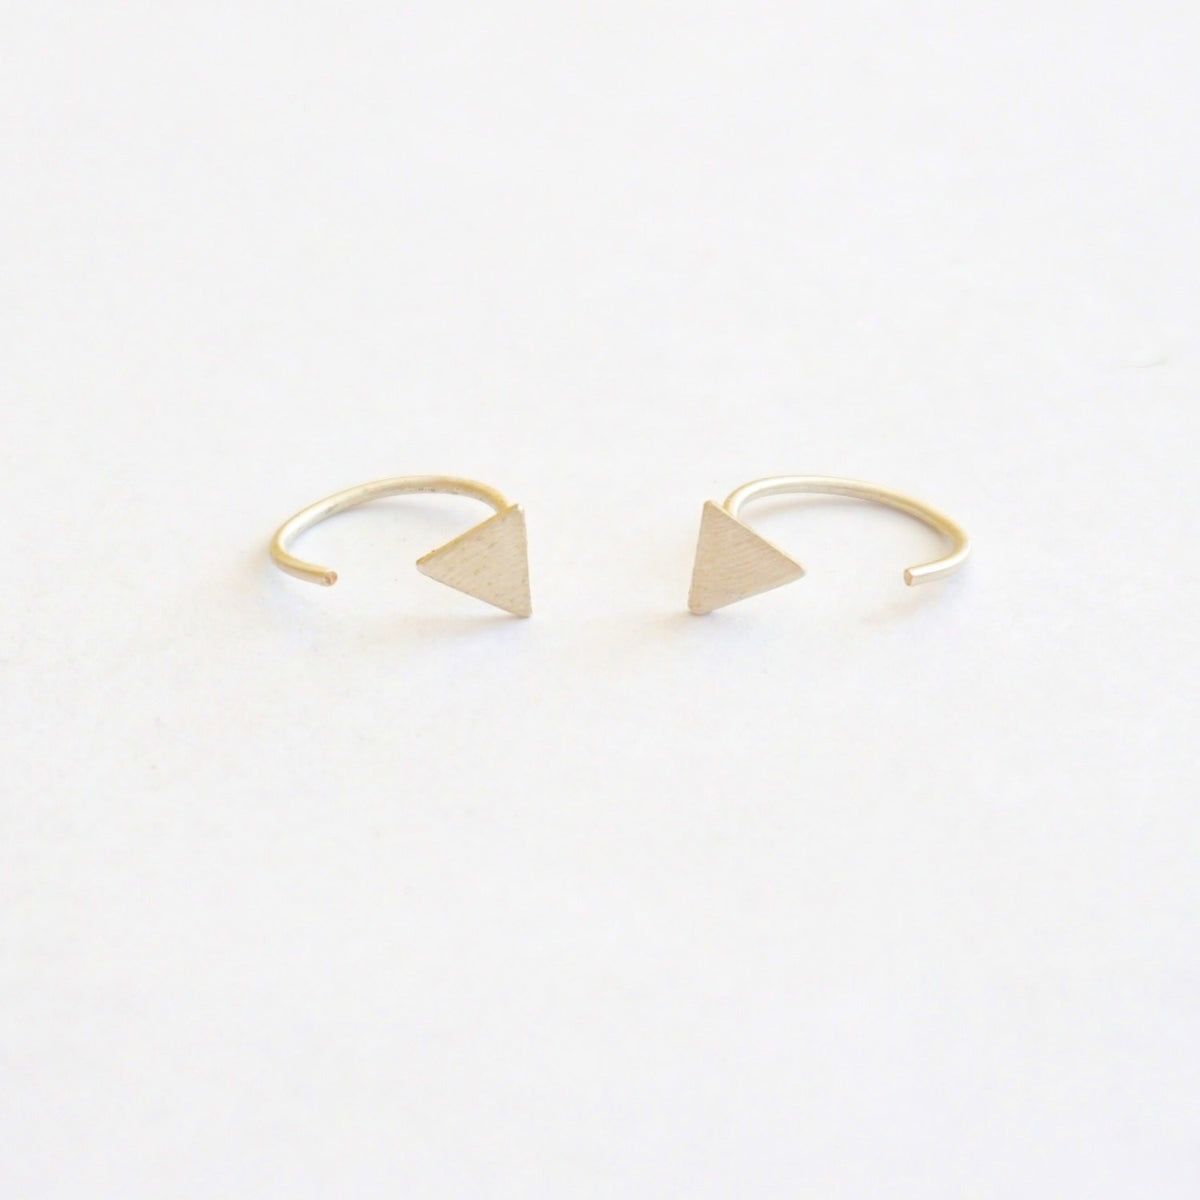 Boho Chic And Stylish, Hand-Made Ear Hugging Hoops With A Triangle Front - 0246 - Virginia Wynne Designs